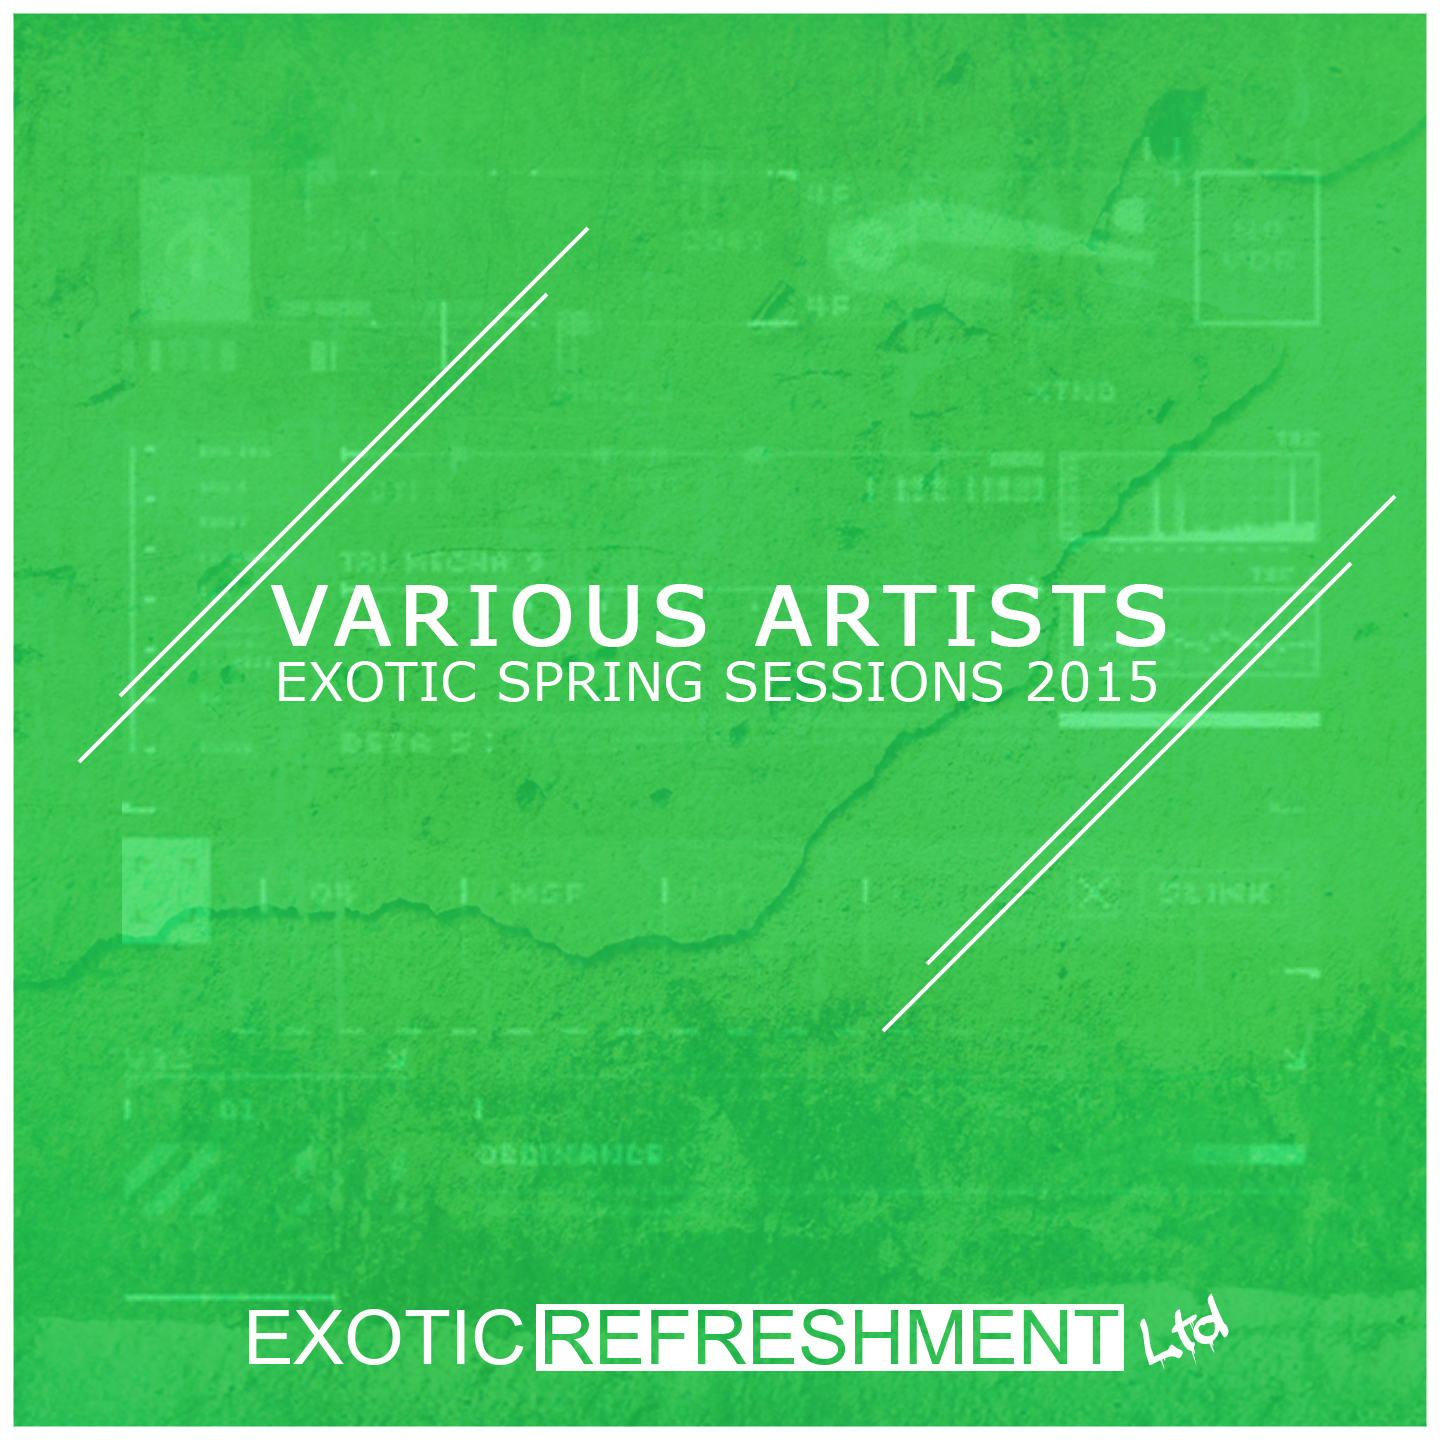 Exotic Spring Sessions 2015